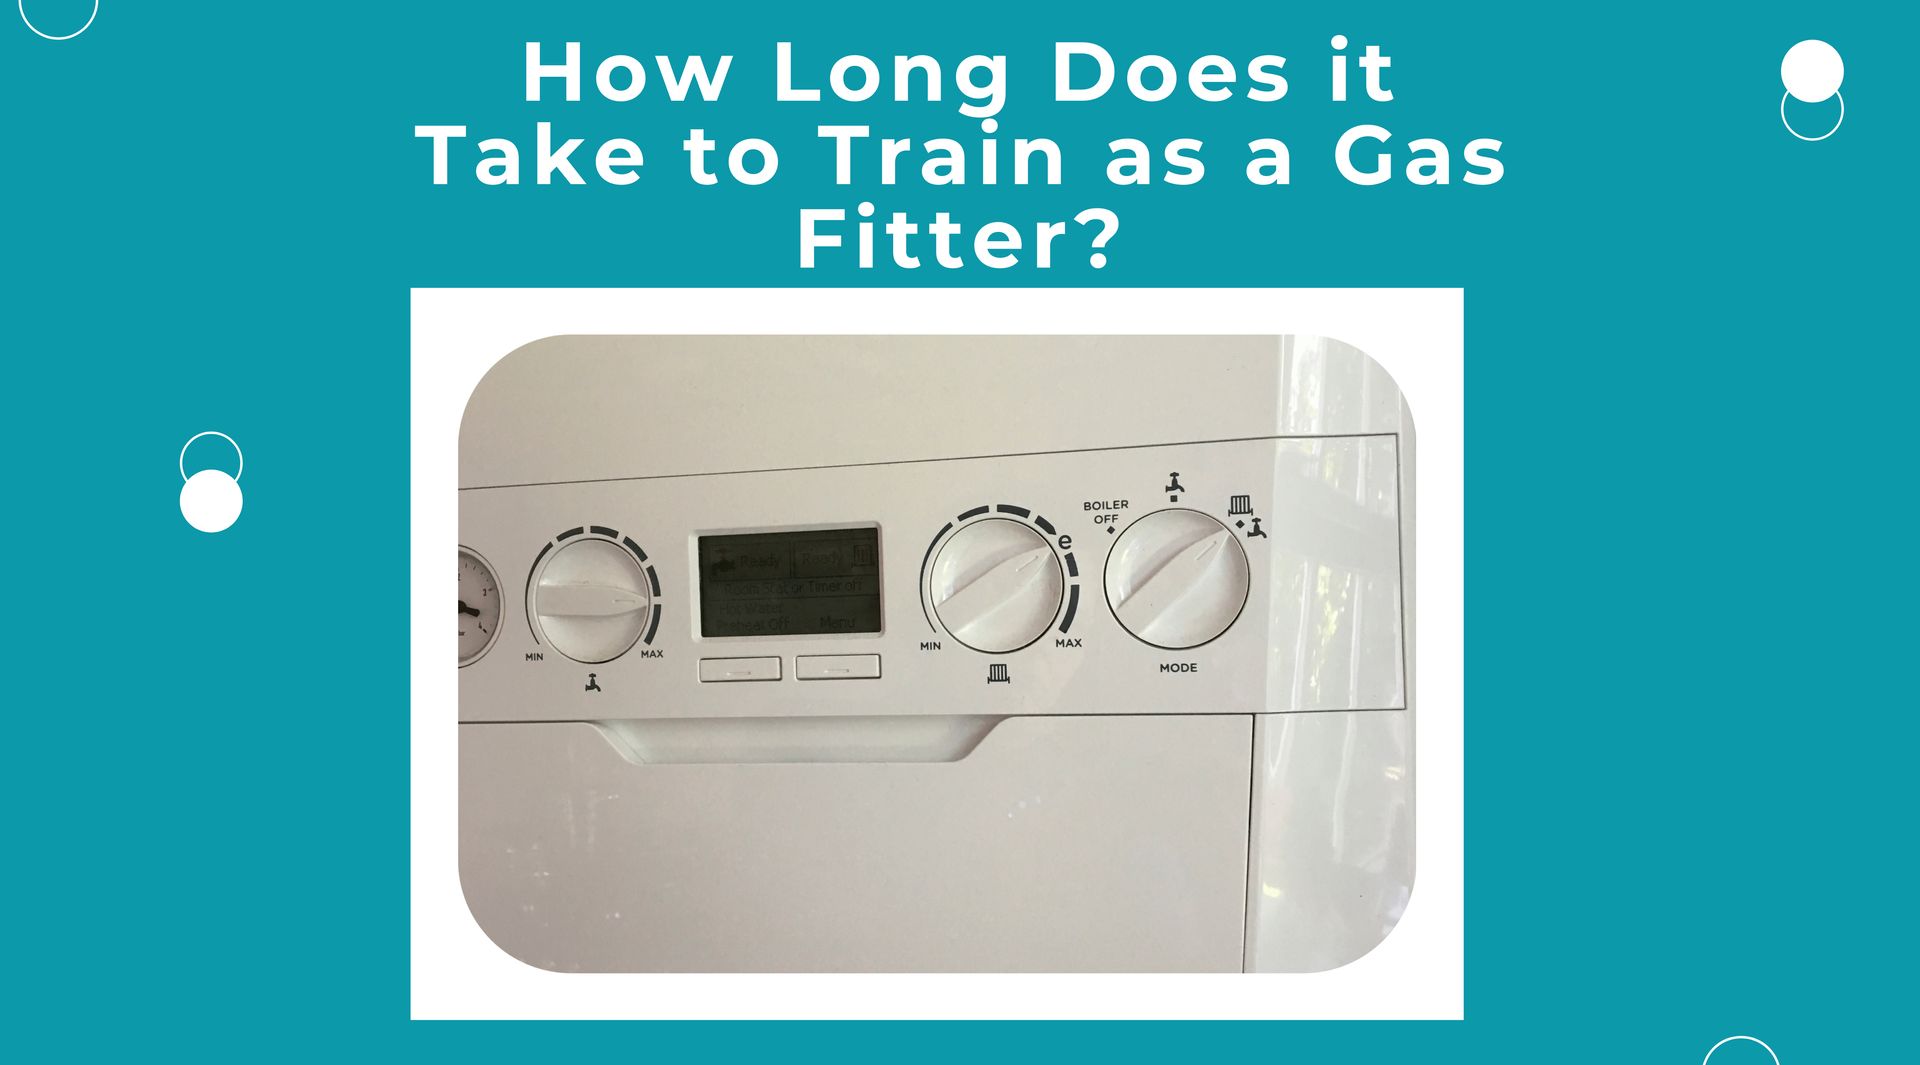 How Long Does it Take to Train as a Gas Fitter?